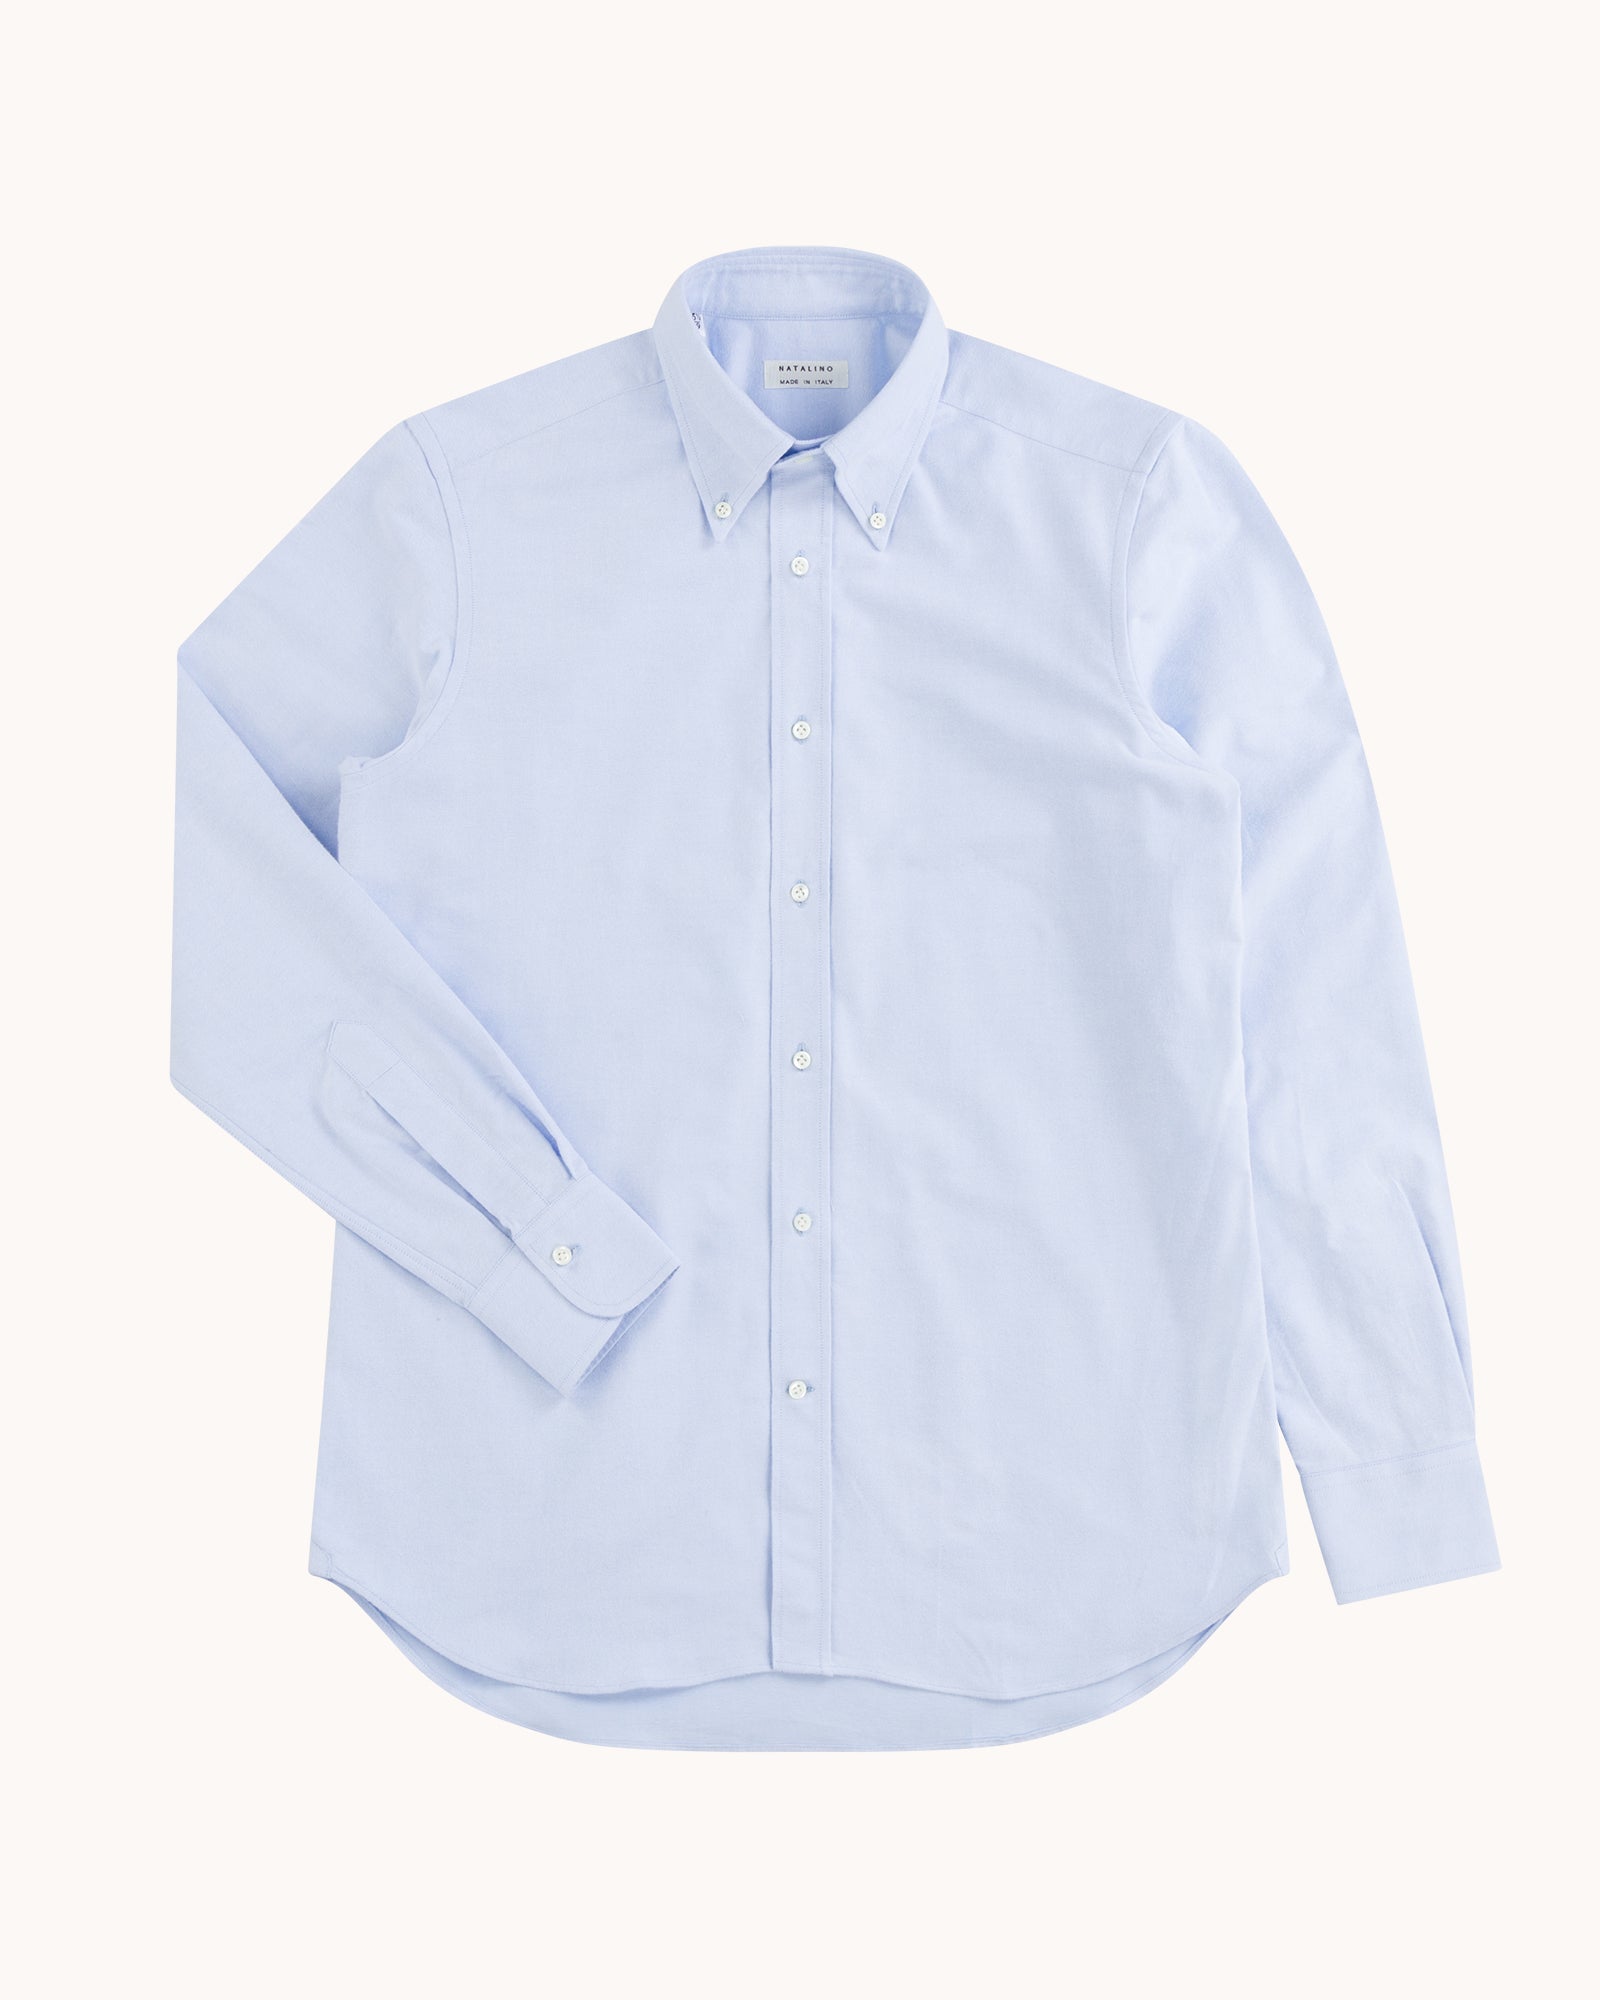 Button Down Collar Shirt - Blue Brushed Oxford Cotton